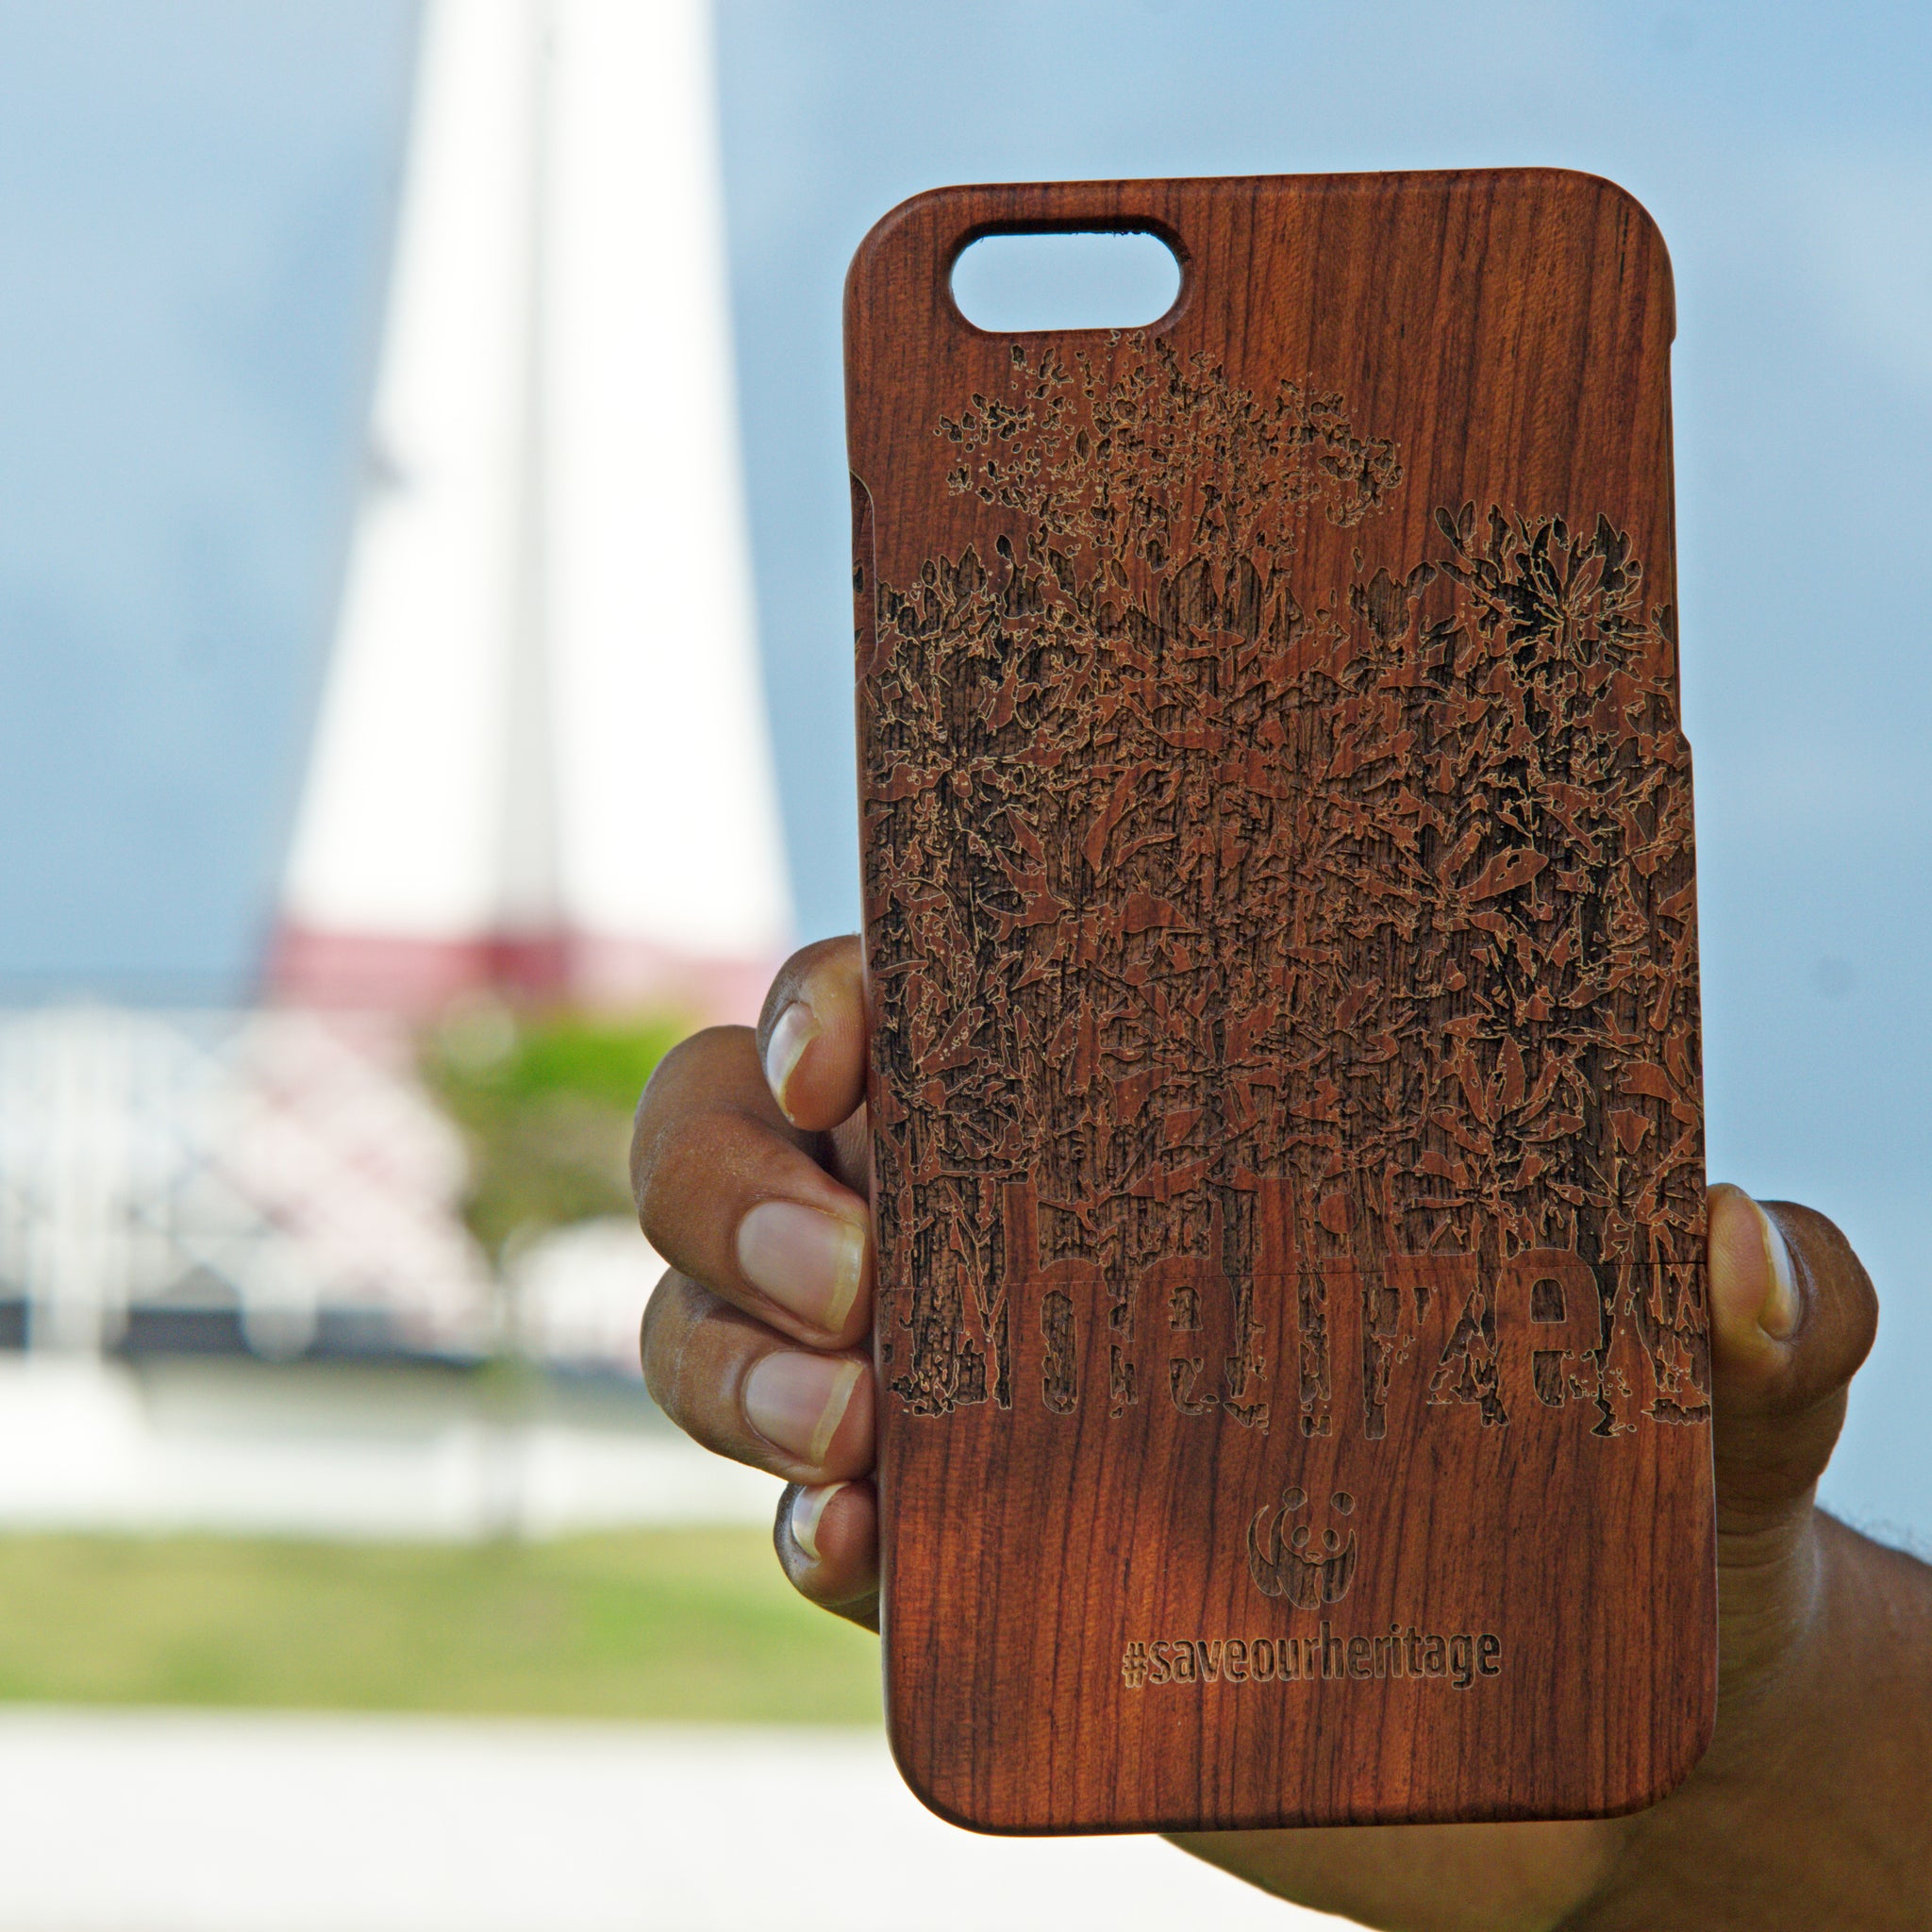 IPhone 6+/6s+ (WWF Belize Saving our Shared Heritage design)